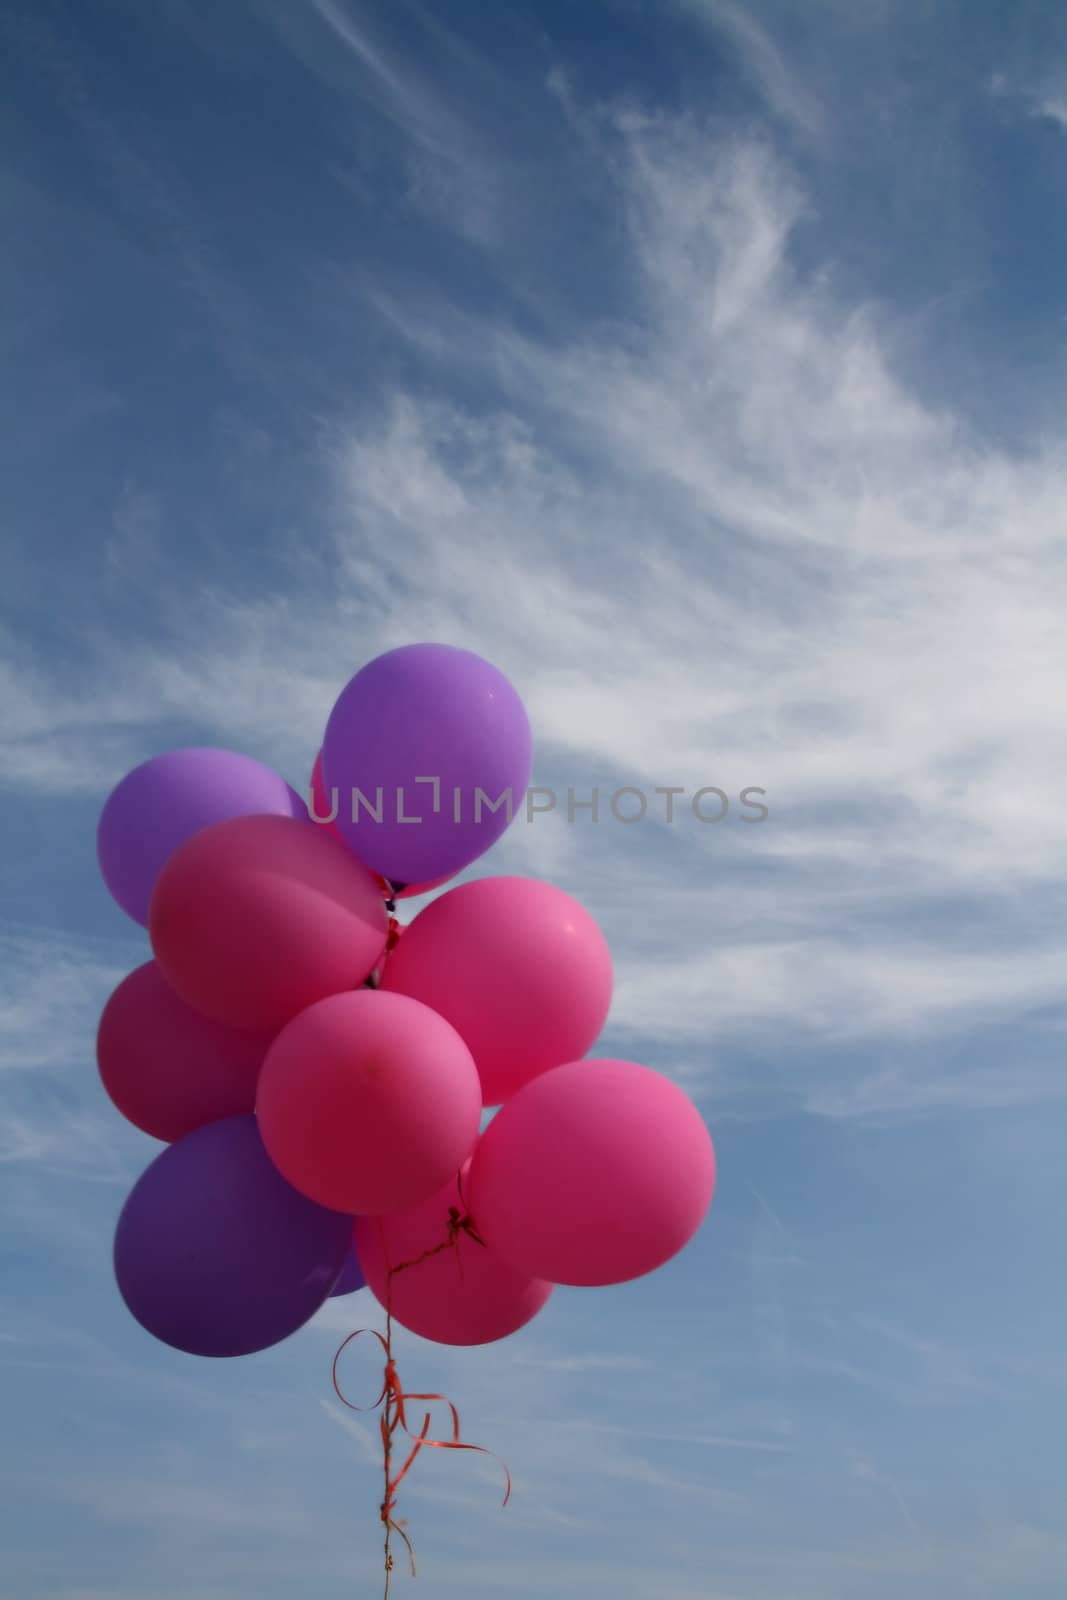 pink and lilac party balloons against blue sky, colorful celebration